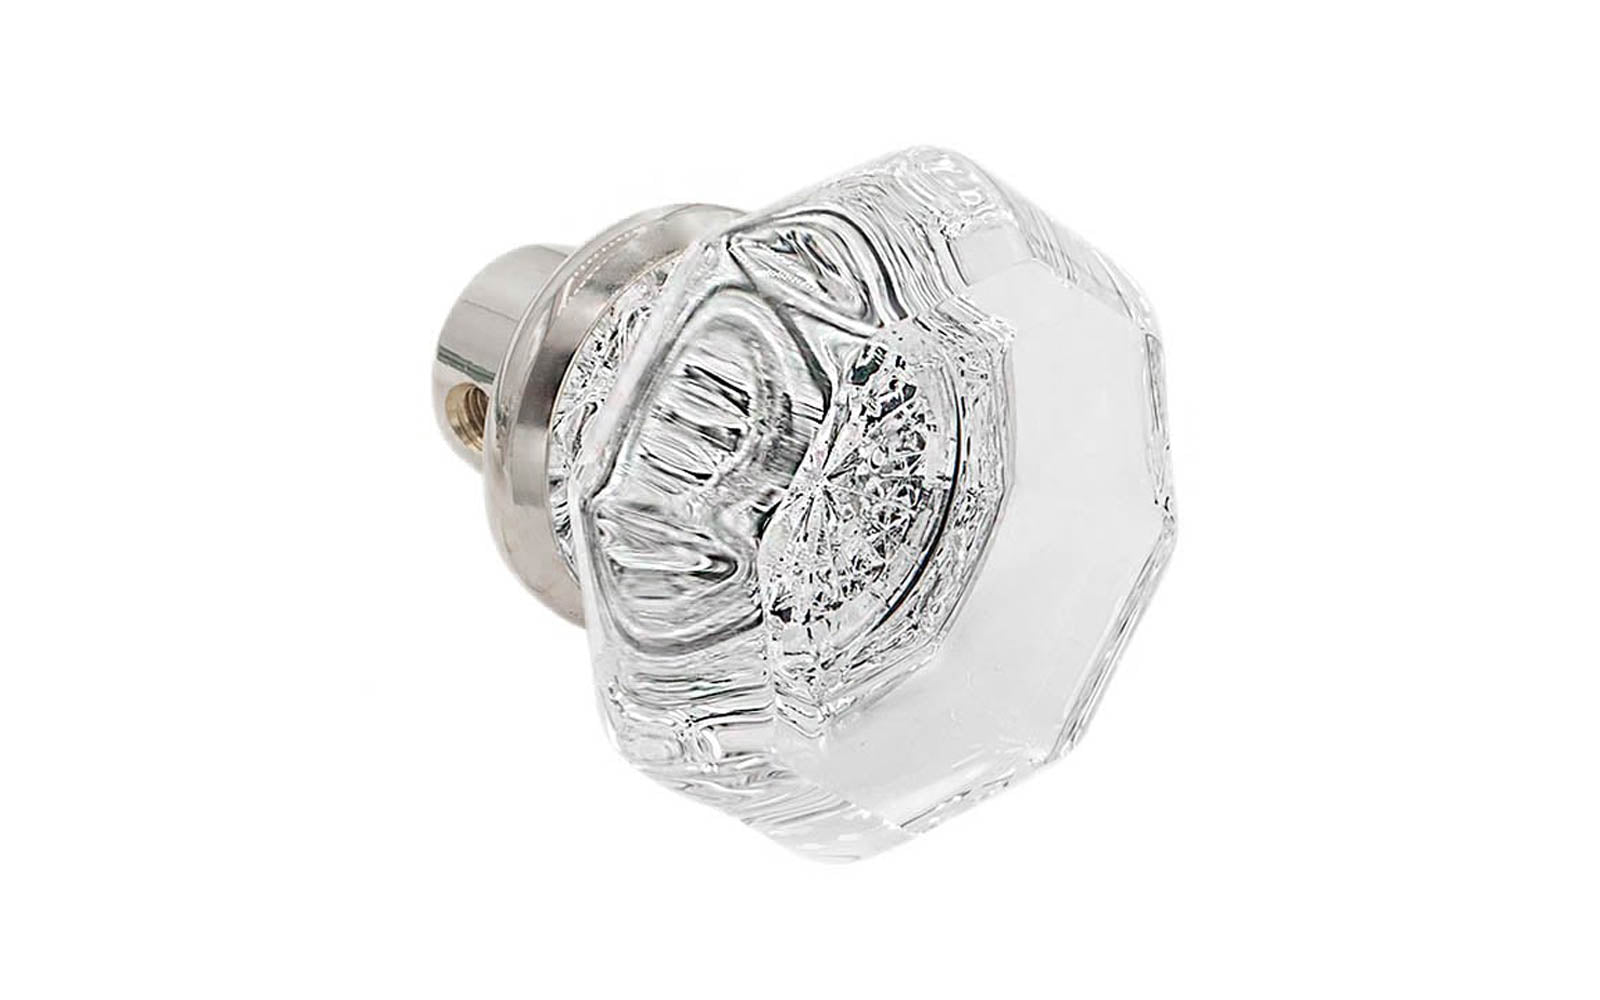 Single Classic Octagonal Clear Glass Doorknob. A high quality & genuine glass doorknob with an attractive Octagon design. The sparkling center point under glass amplifies reflected light to showcase beautiful facets. Solid brass base. Reproduction Glass Door Knobs. Traditional Octagonal Glass Knobs. One knob. 